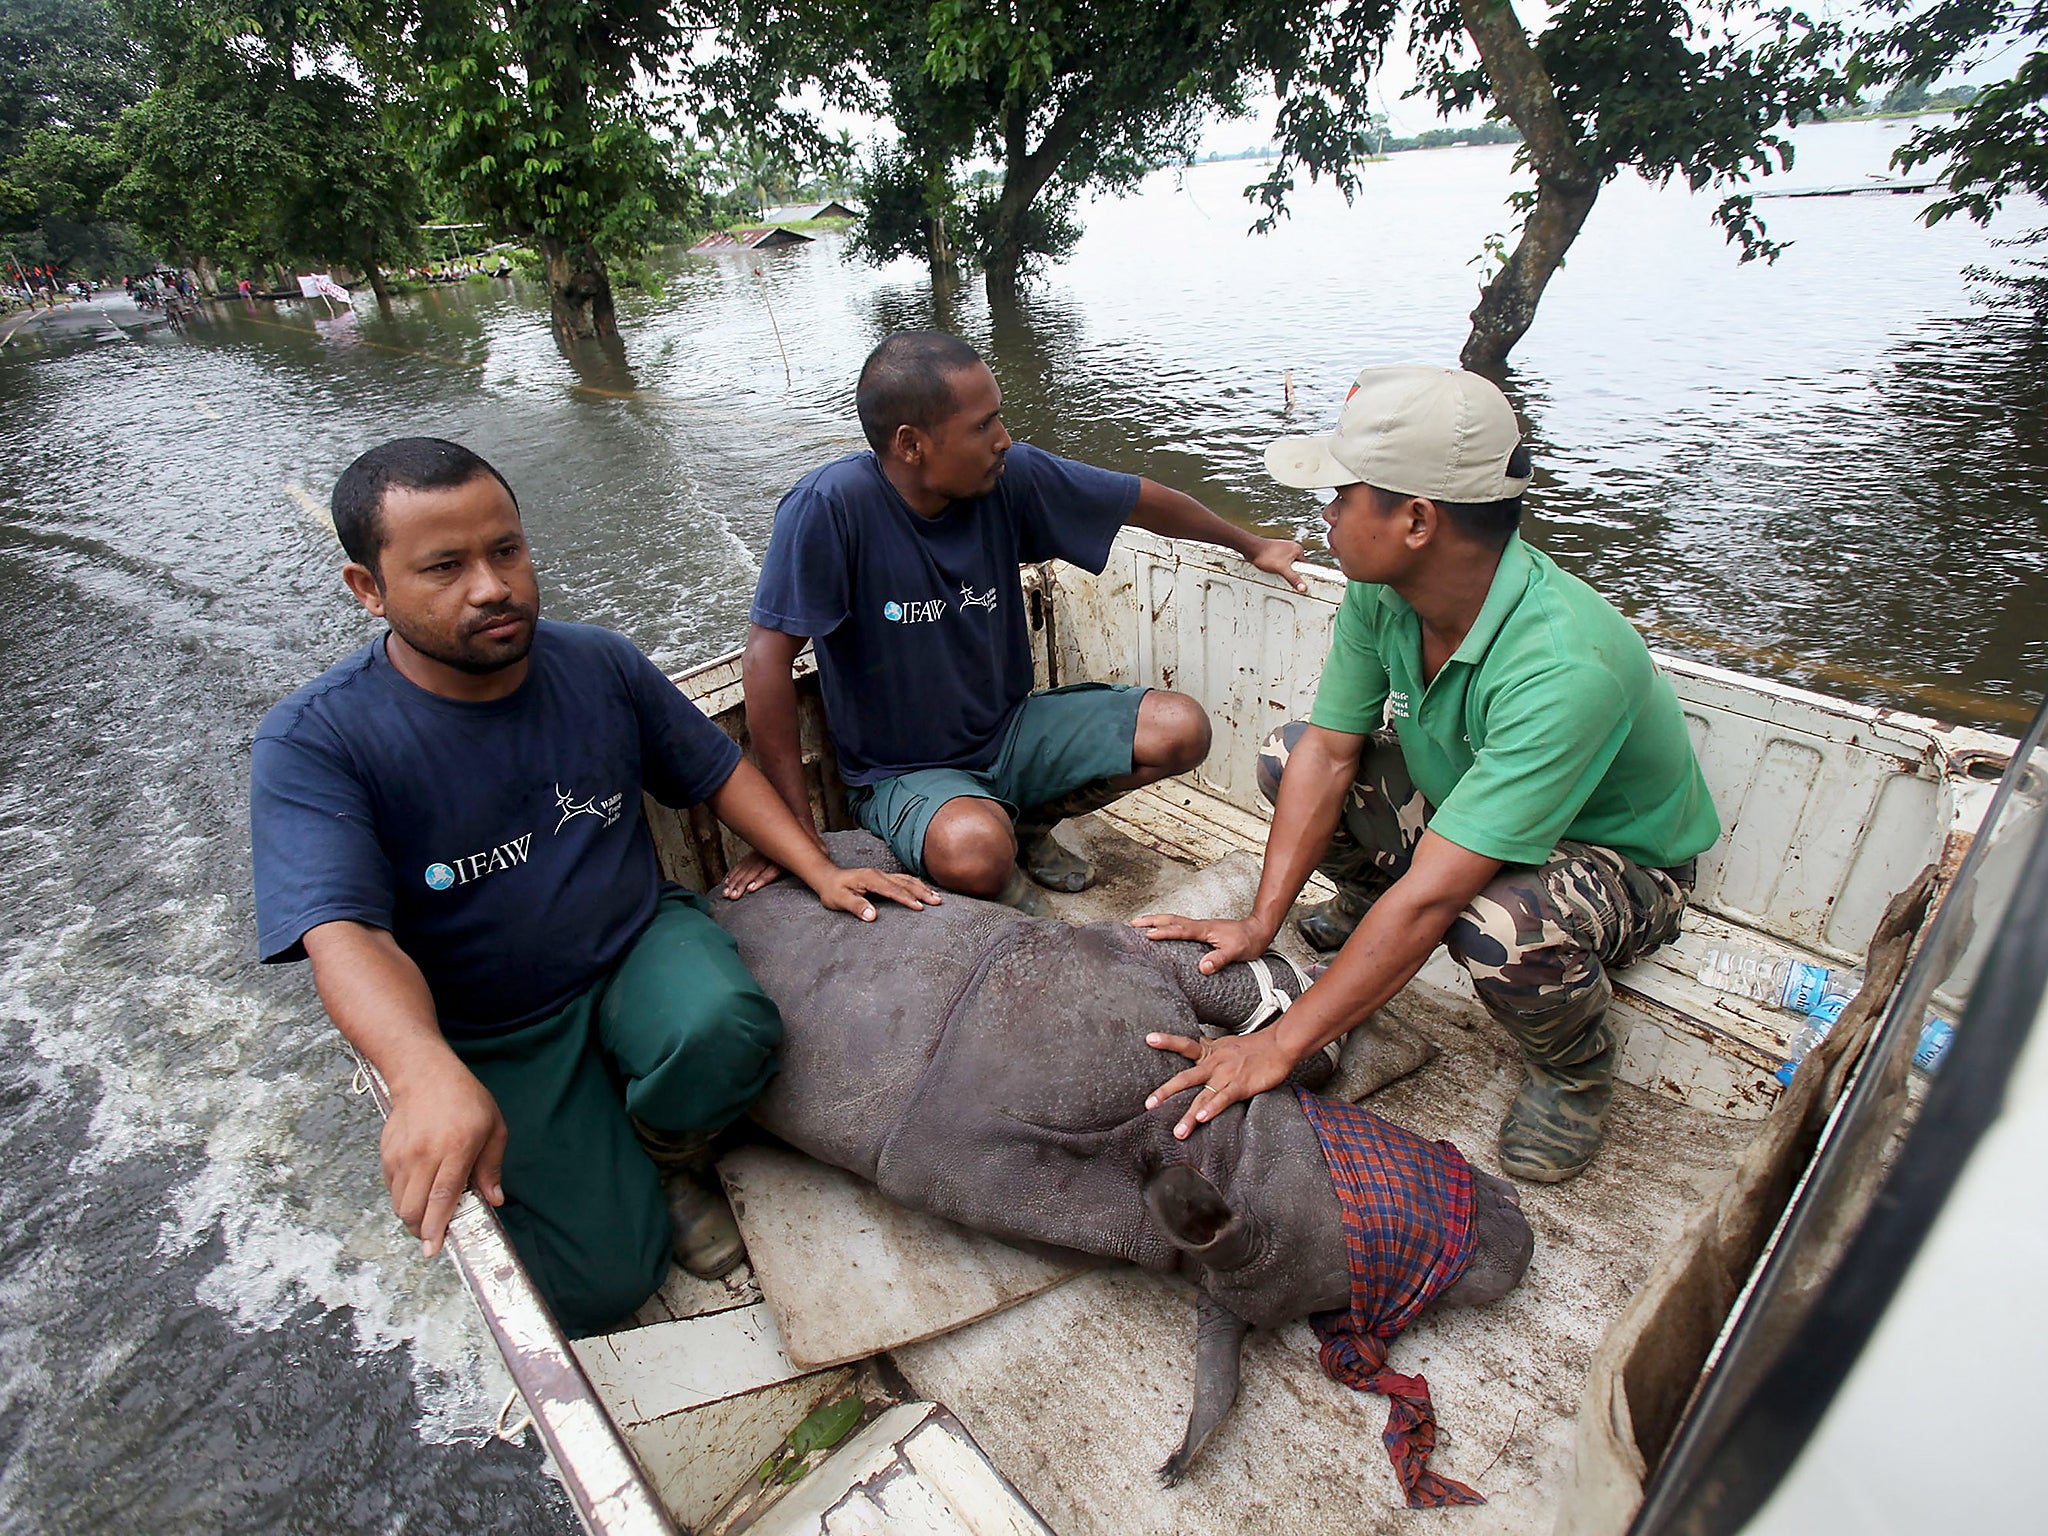 &#13;
A rescued infant rhino calf is transported to safety after being found by wildlife officials and volunteers in flood waters (Getty)&#13;